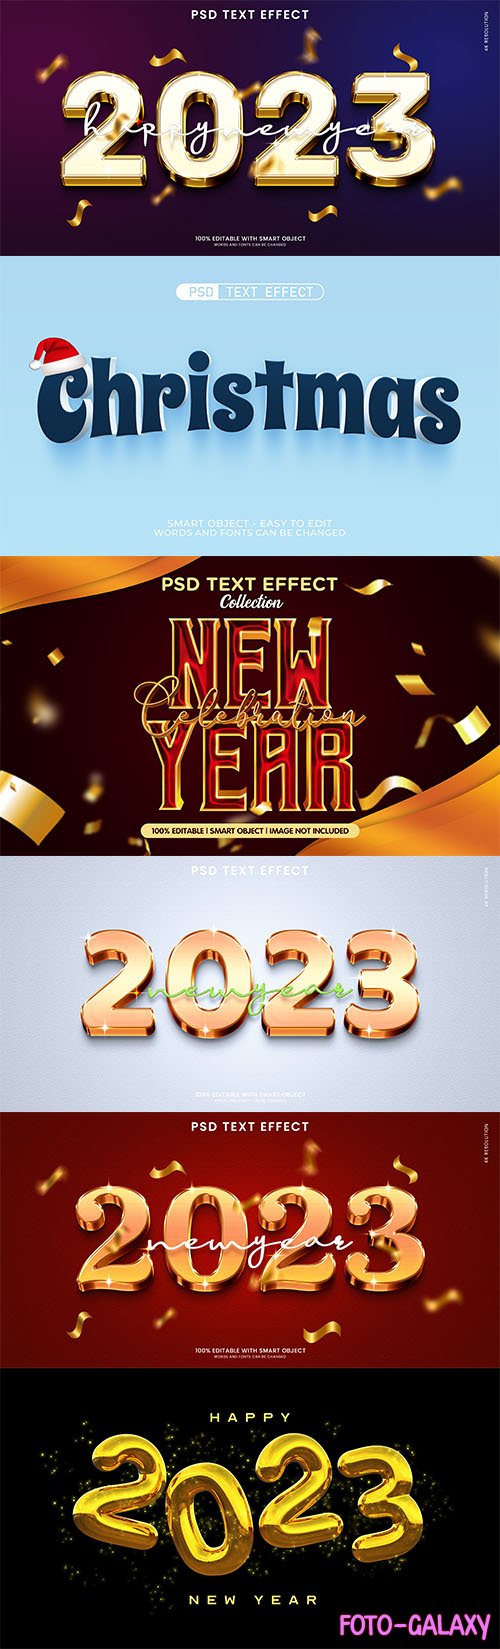 Christmas and new year 2023 celebration text effect psd